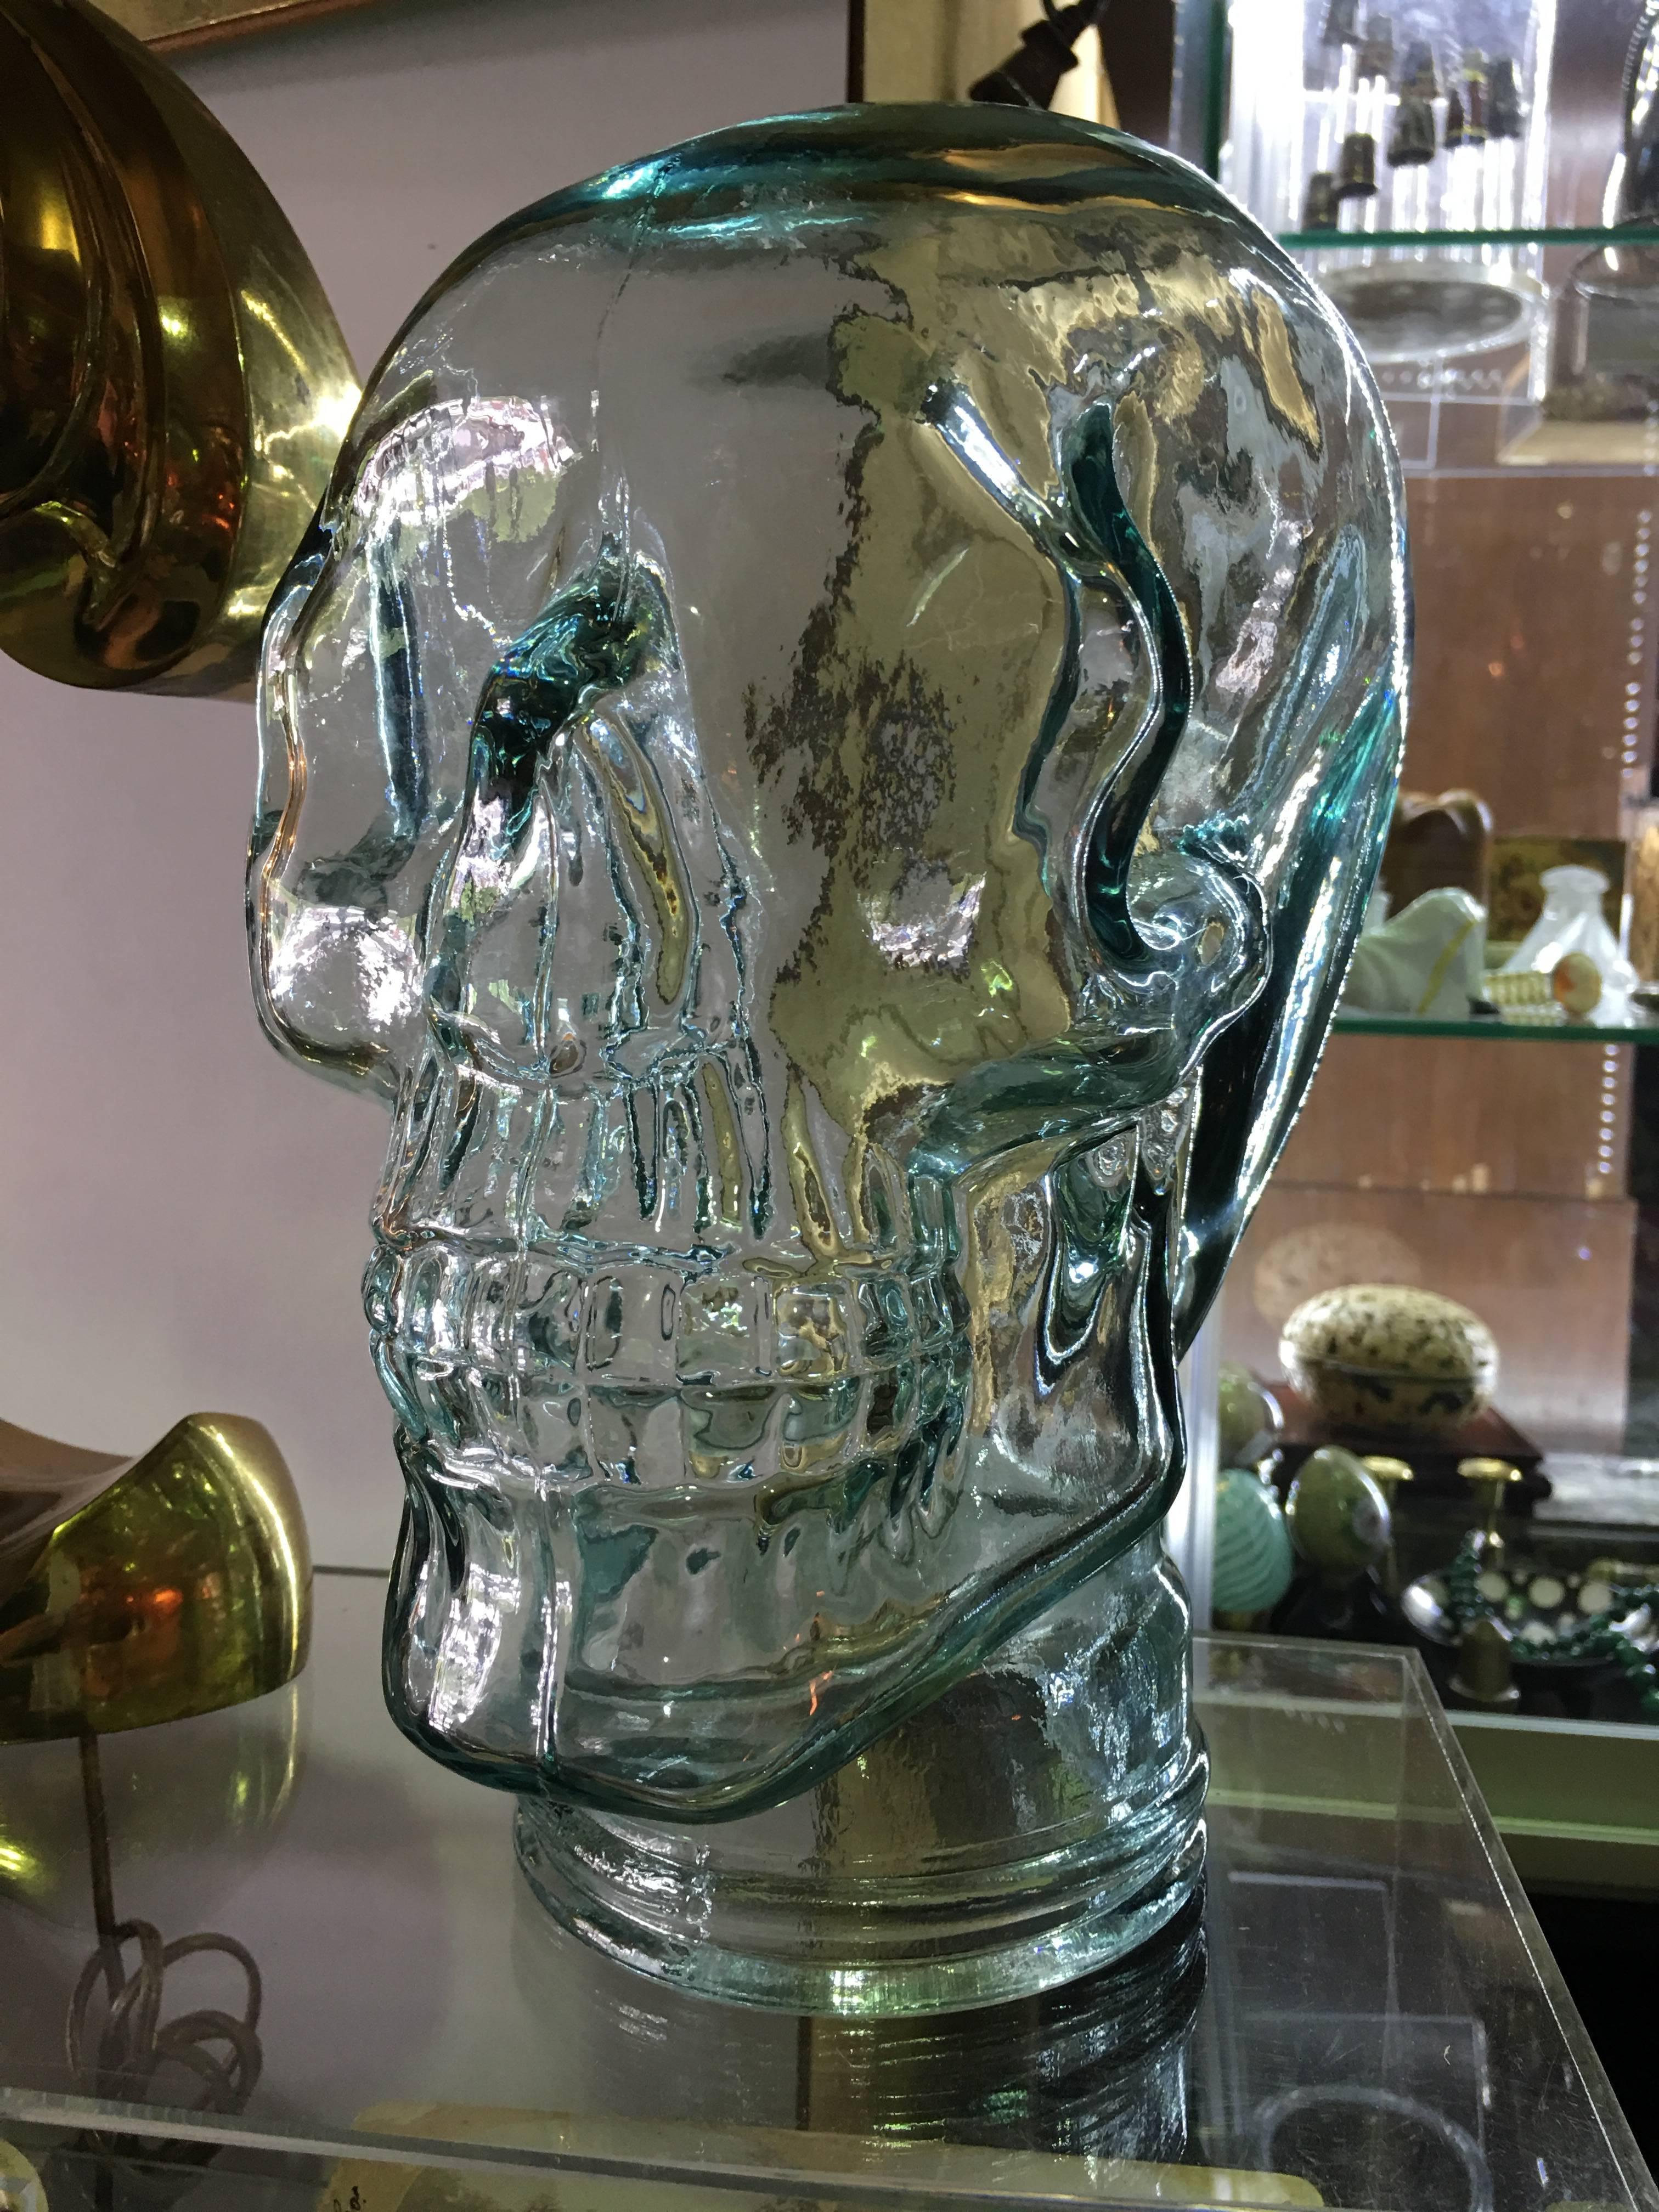 Terrific sculptural glass full size skull. Comprised of blown glass with green tint. Great piece of artwork for your collection.